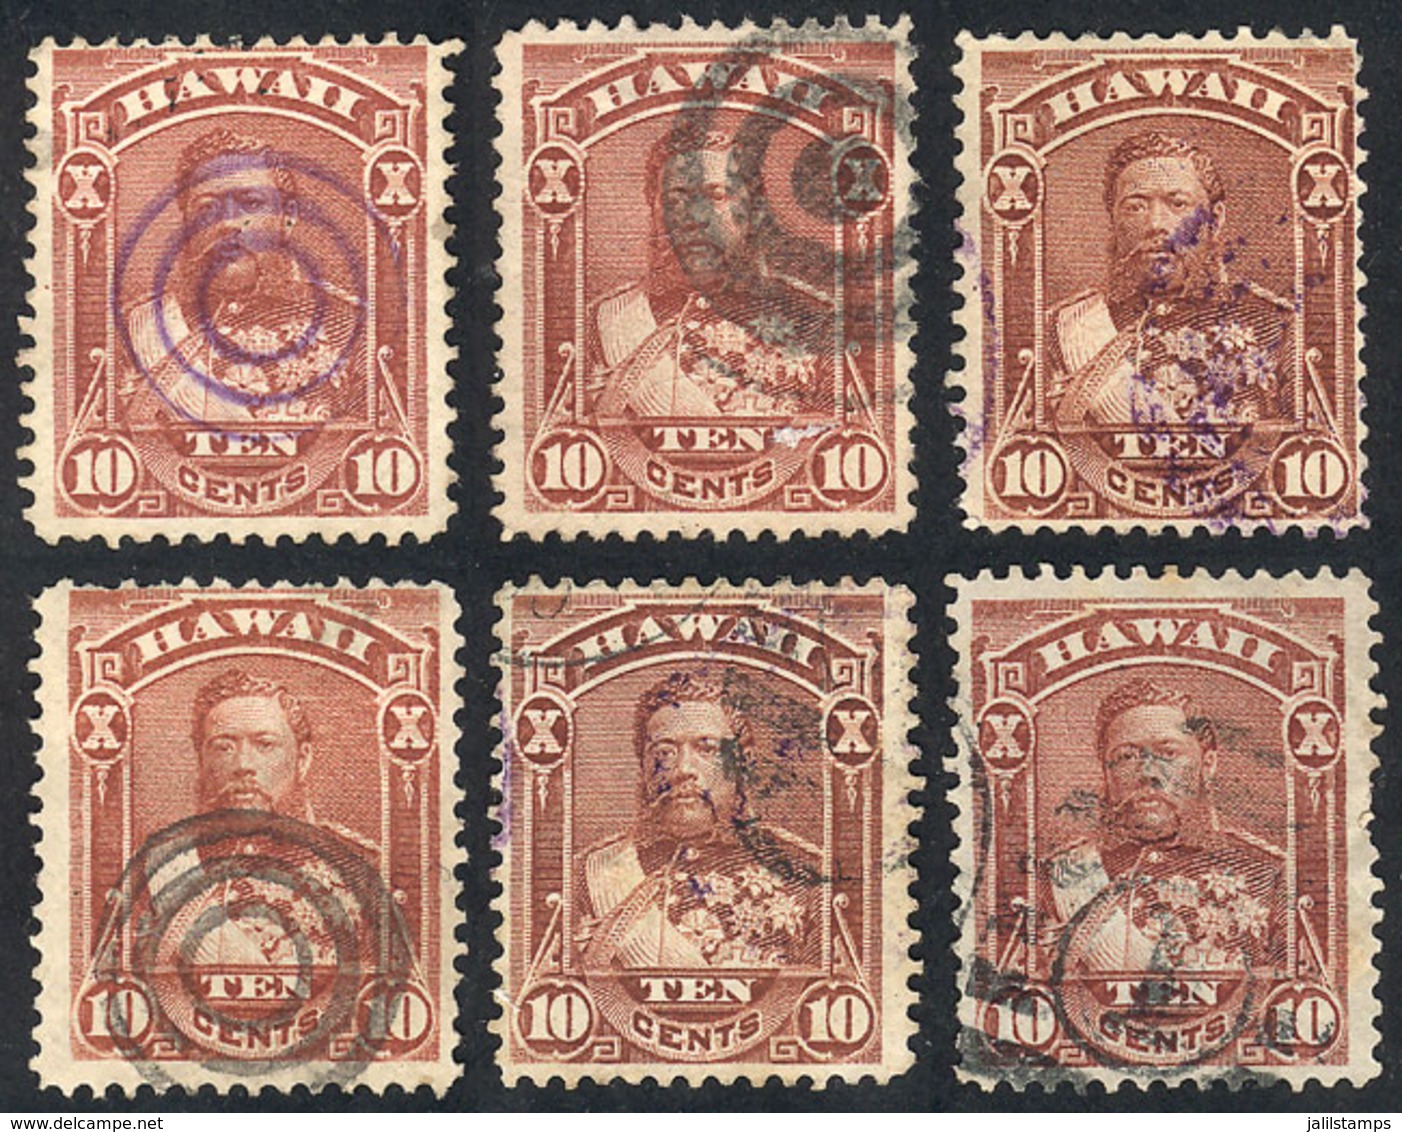 UNITED STATES - HAWAII: Sc.44, 6 Used Examples With Varied Cancels, Interesting! - Hawaii